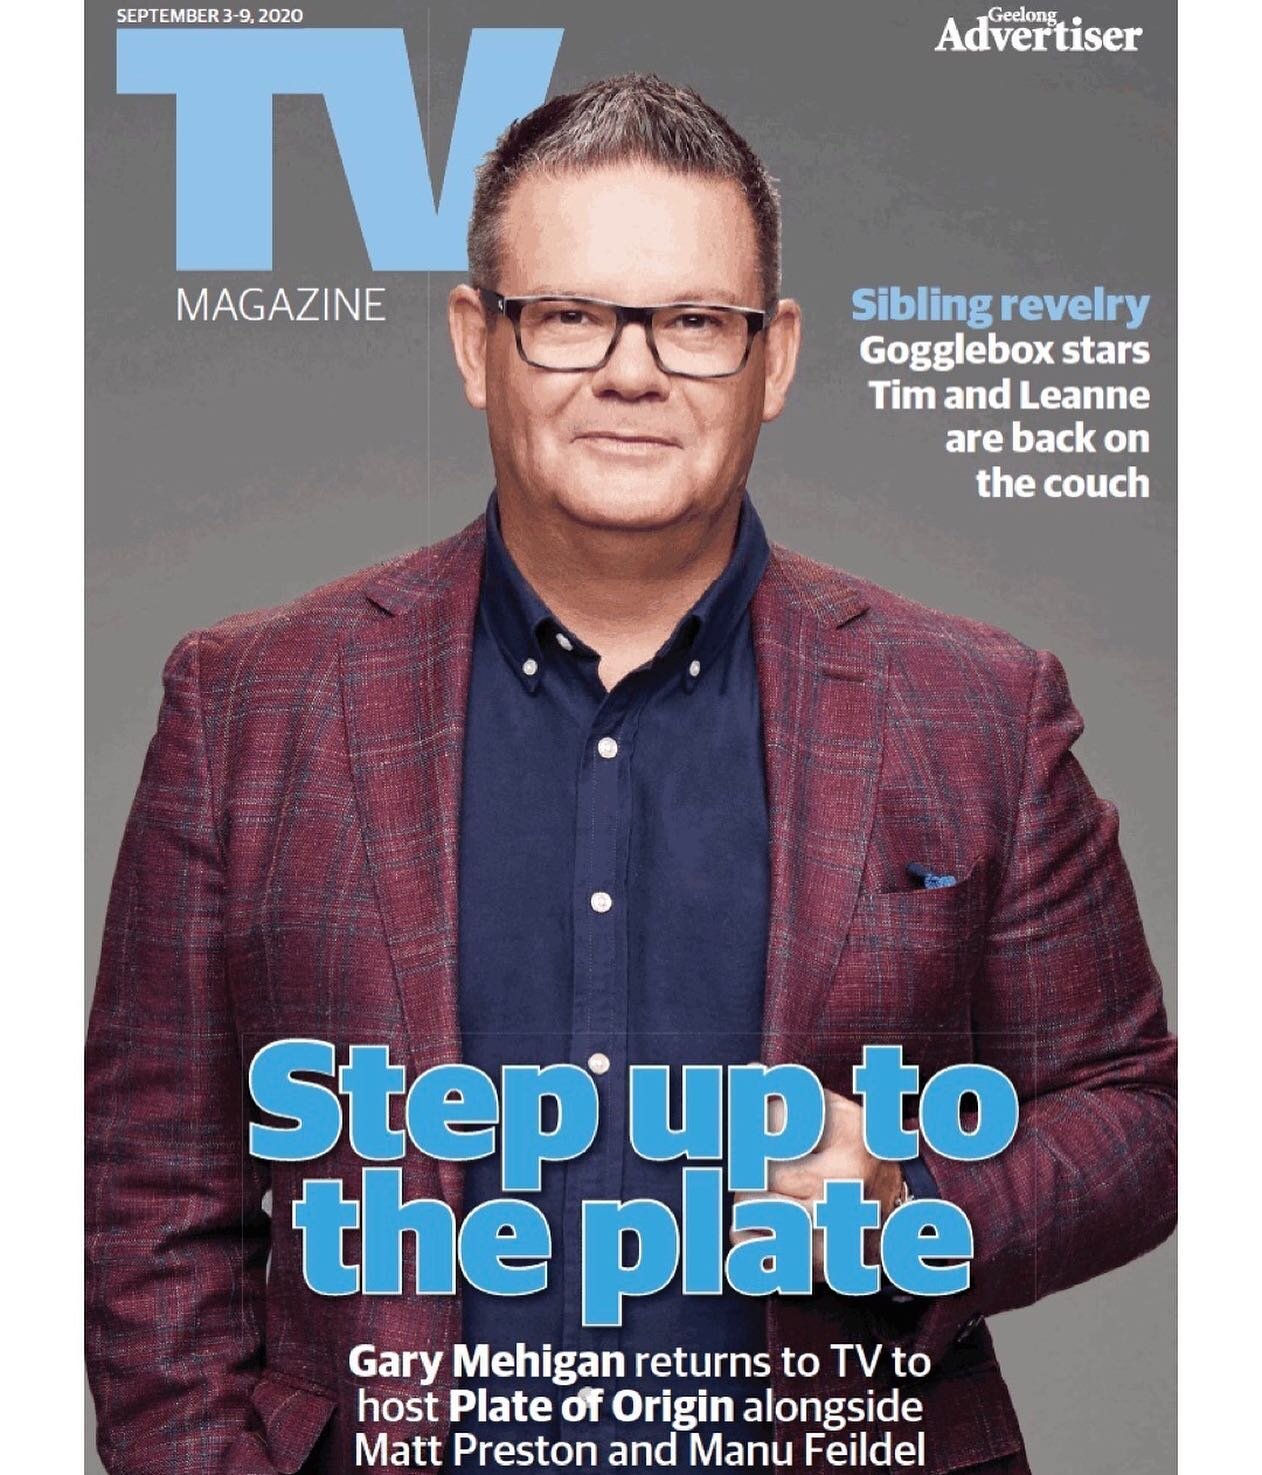 Gary Mehigan chats to the Geelong Advertiser&rsquo;s Danielle McGrane about returning to TV screens alongside Matt Preston and Manu Feildel for Channel 7&rsquo;s #PlateOfOriginAU